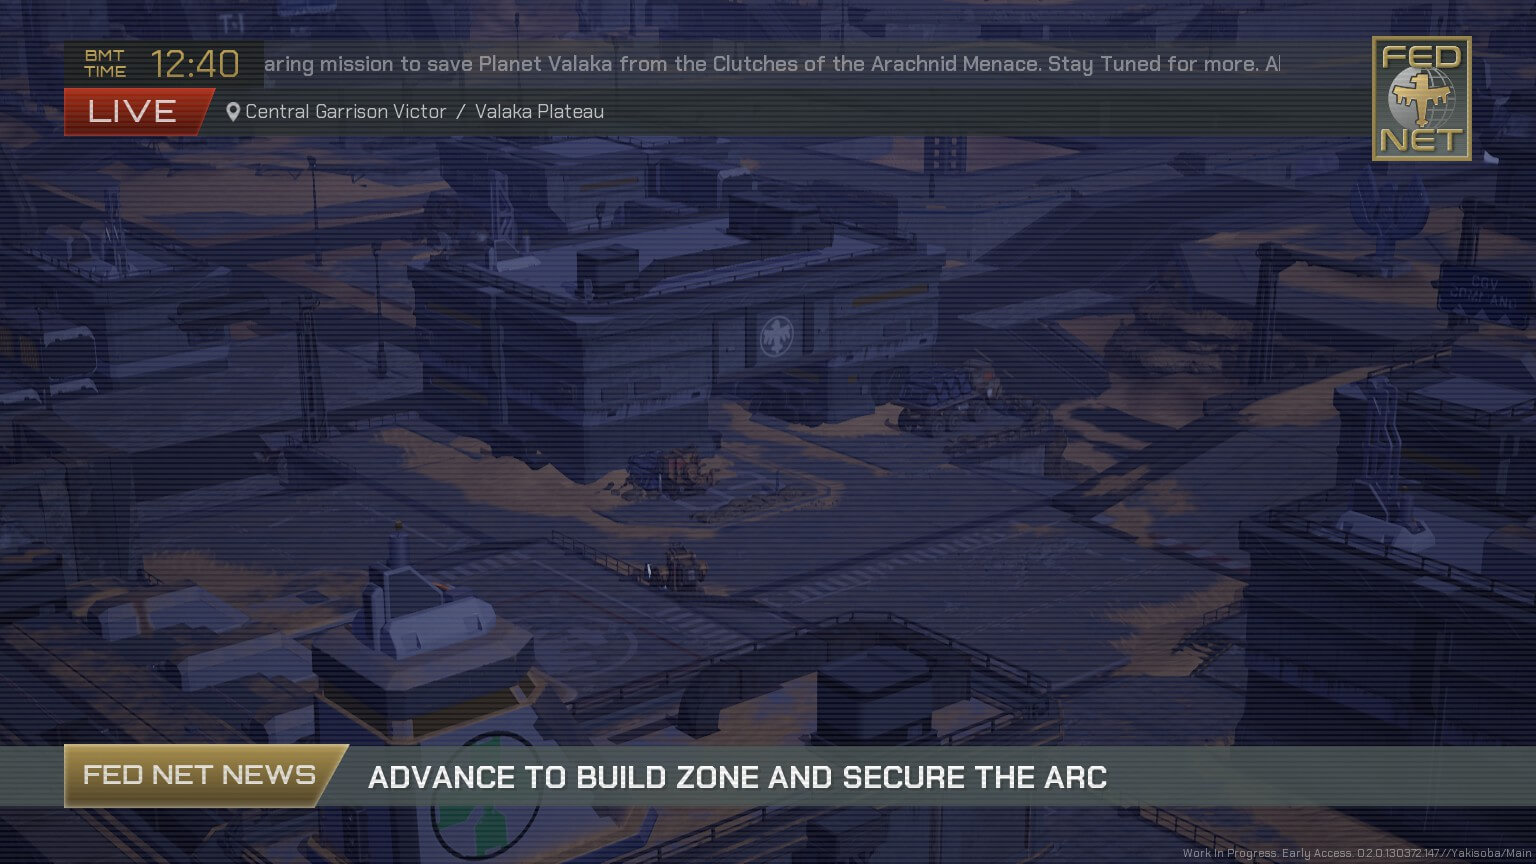 A broadcast that players get before joining a match. Below shows the current objective being done in the game.